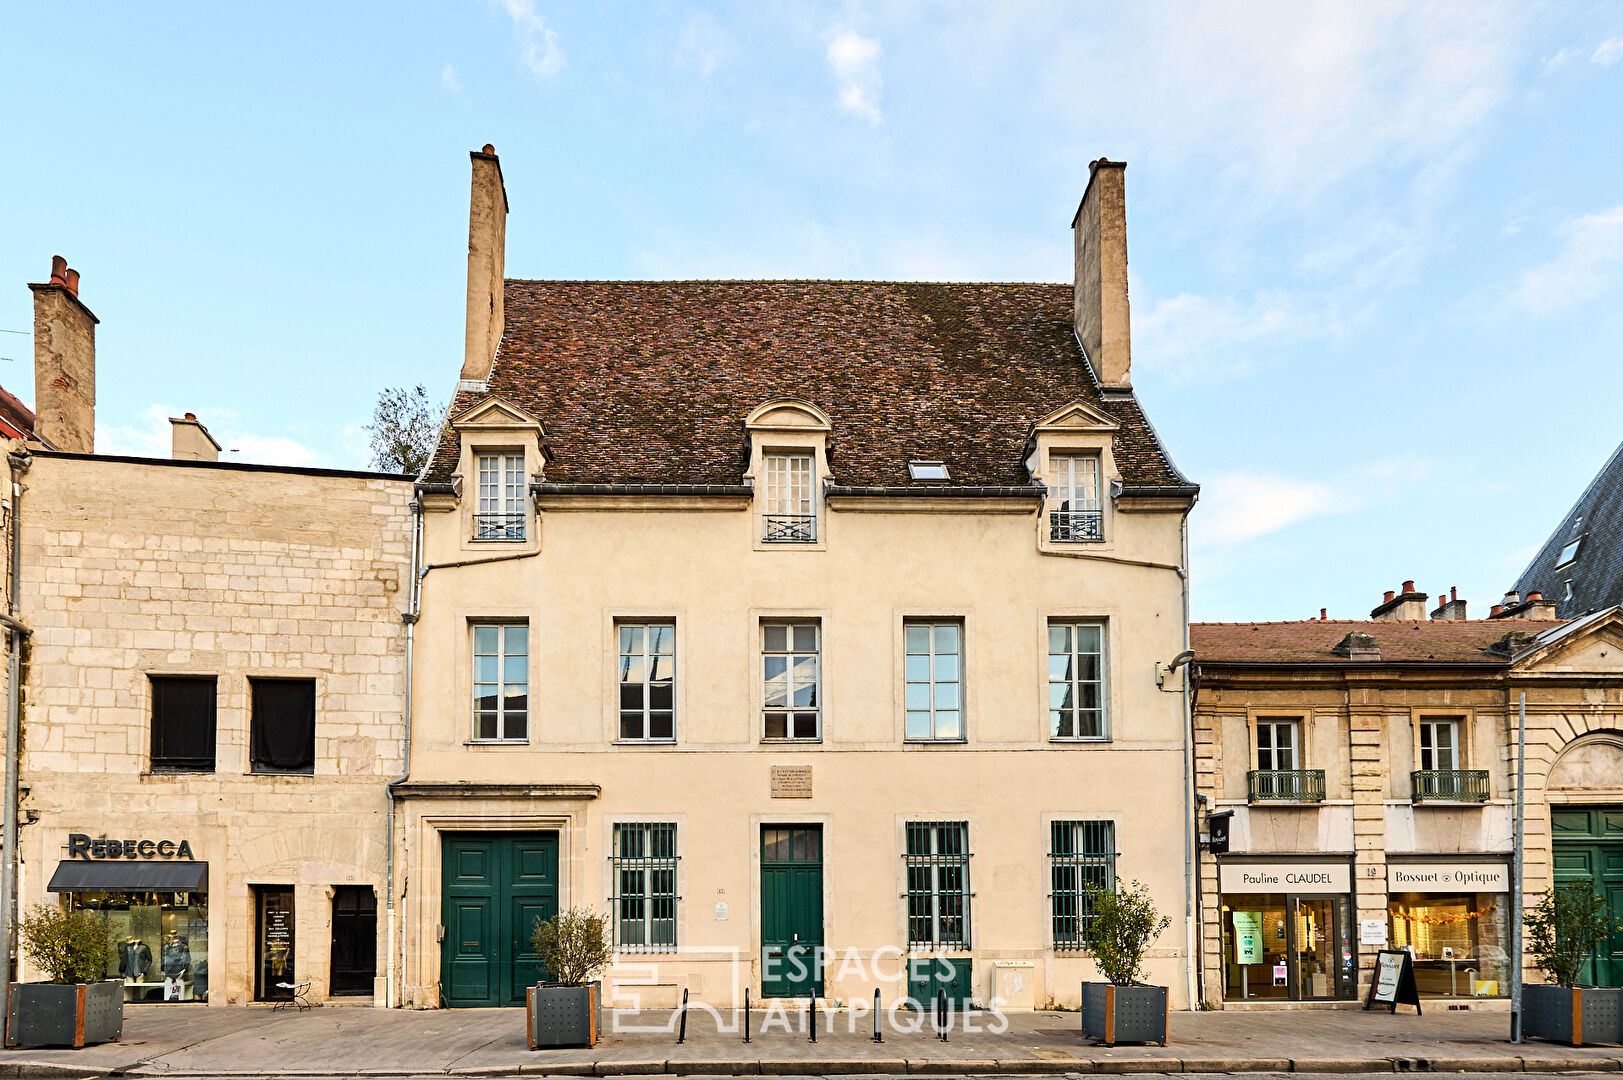 The private mansion steeped in history in the heart of Dijon